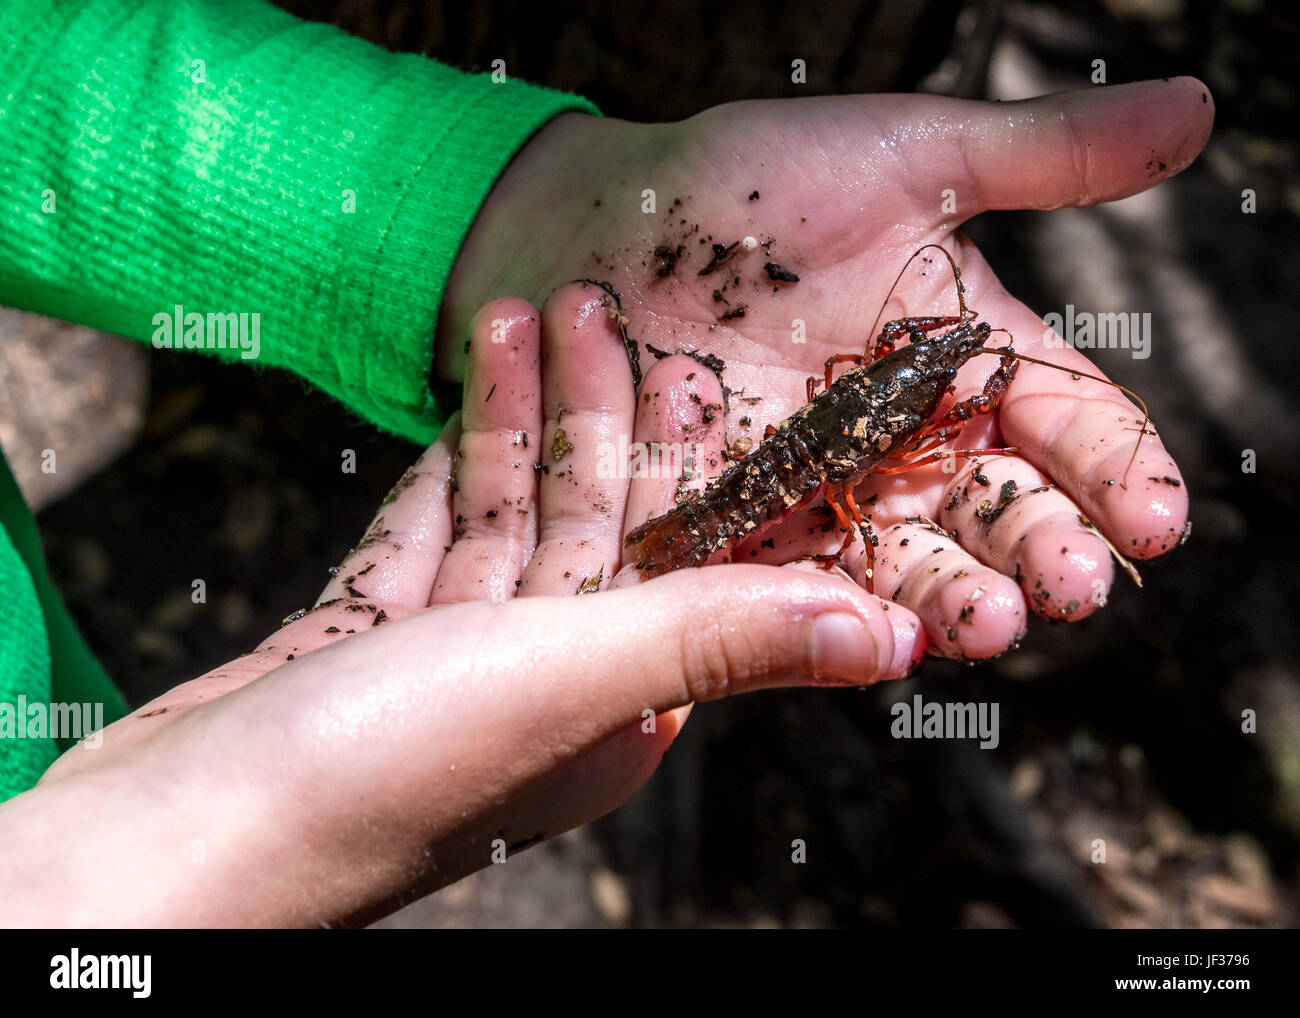 A crawdad or crayfish with small pincers rests on a small child's hands.  Caught in a pond having fun in nature on a summer afternoon. Stock Photo